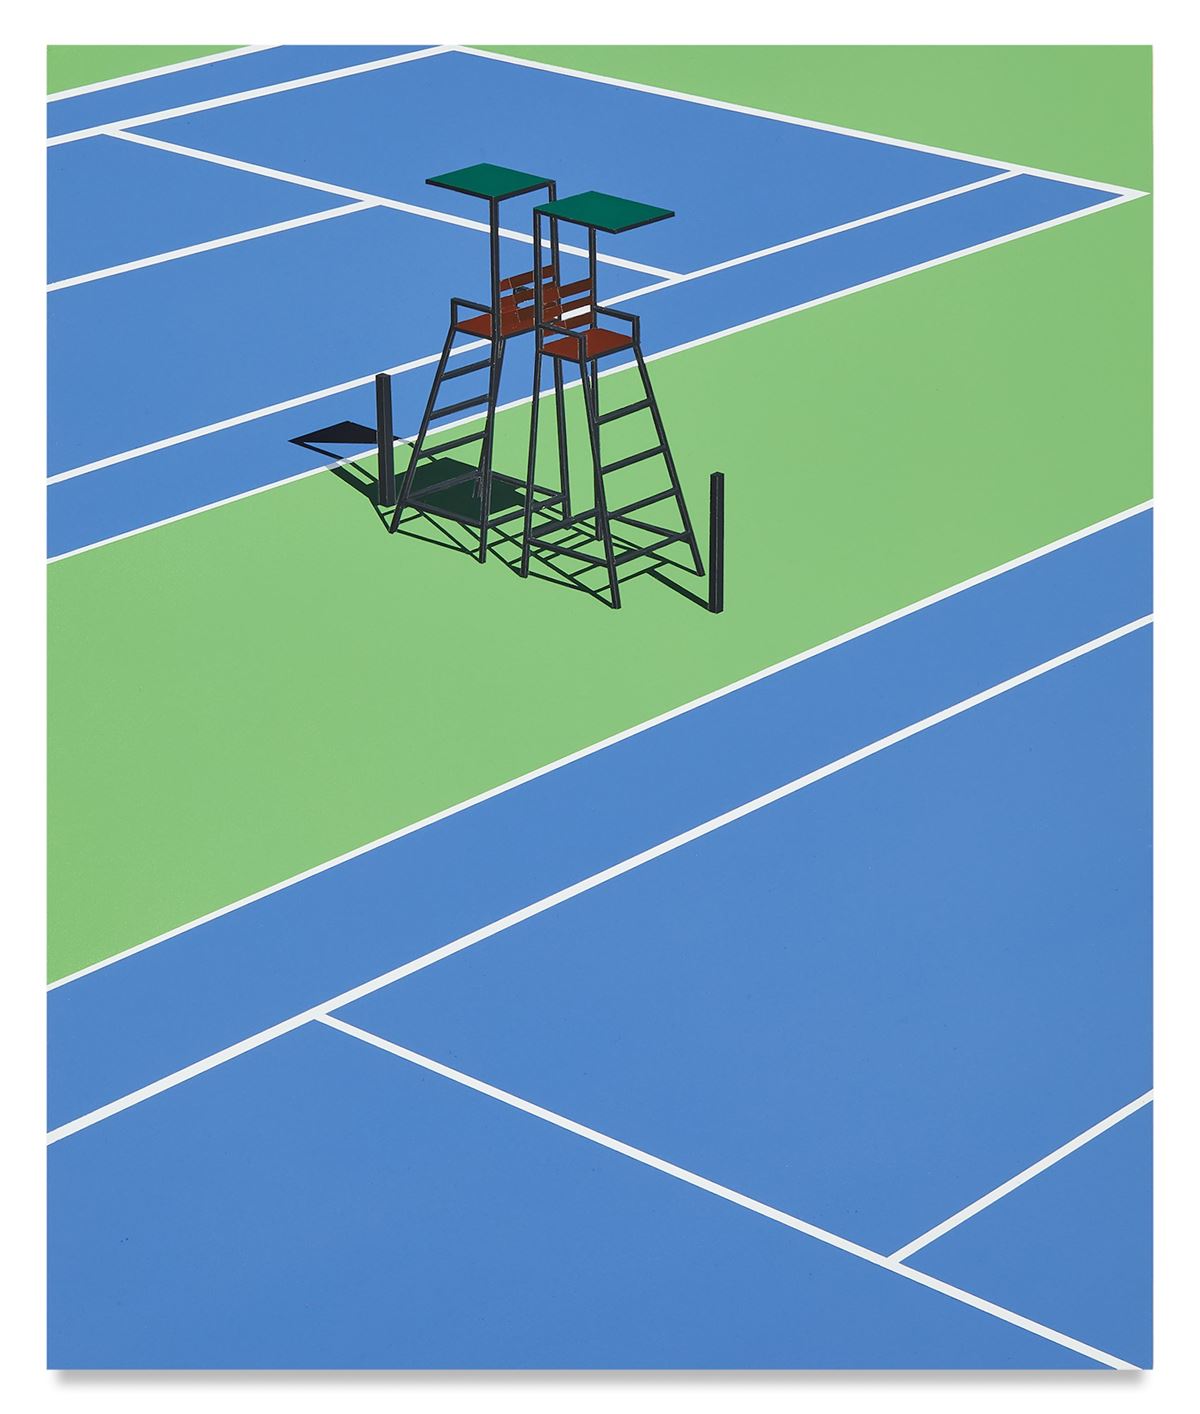 Empty Courts Queens NY 2020 by Daniel Rich Ocula